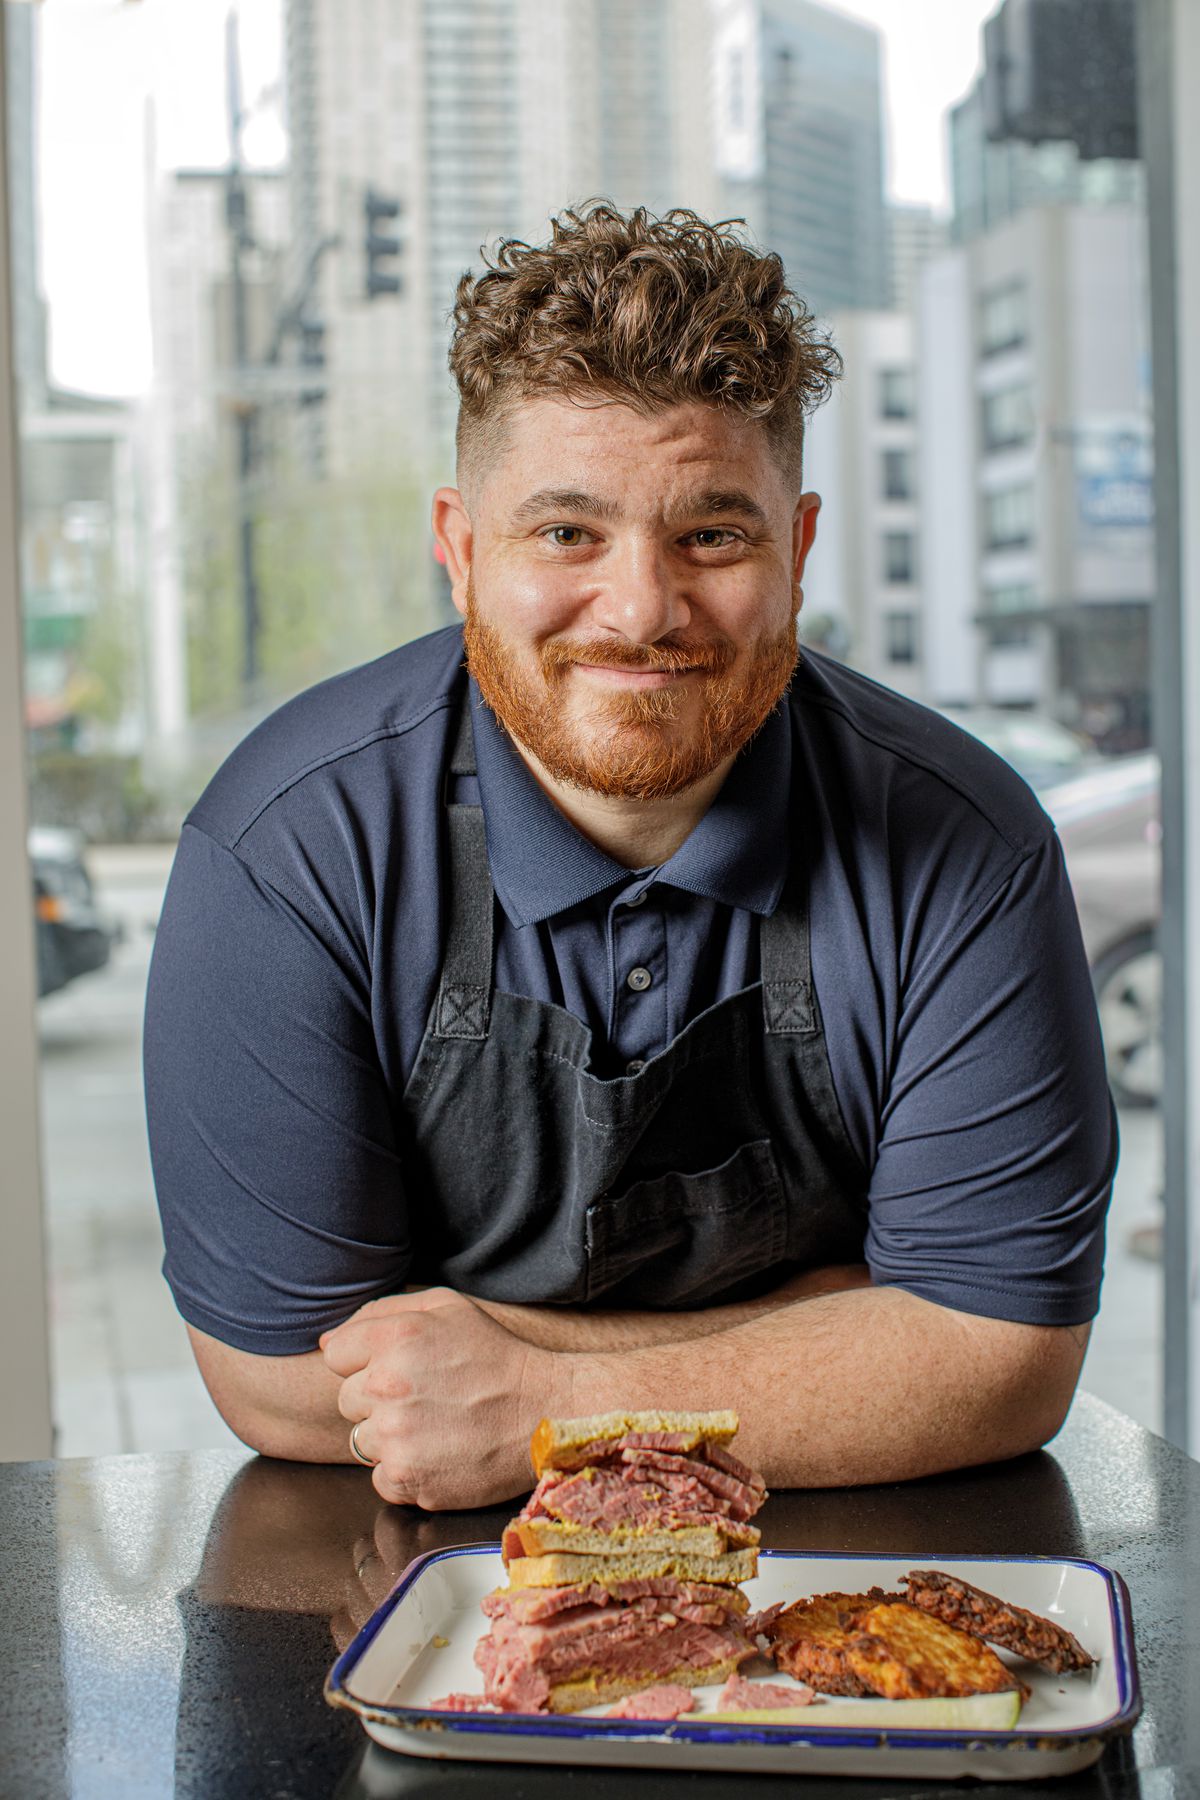 A man in an apron poses and smiles.